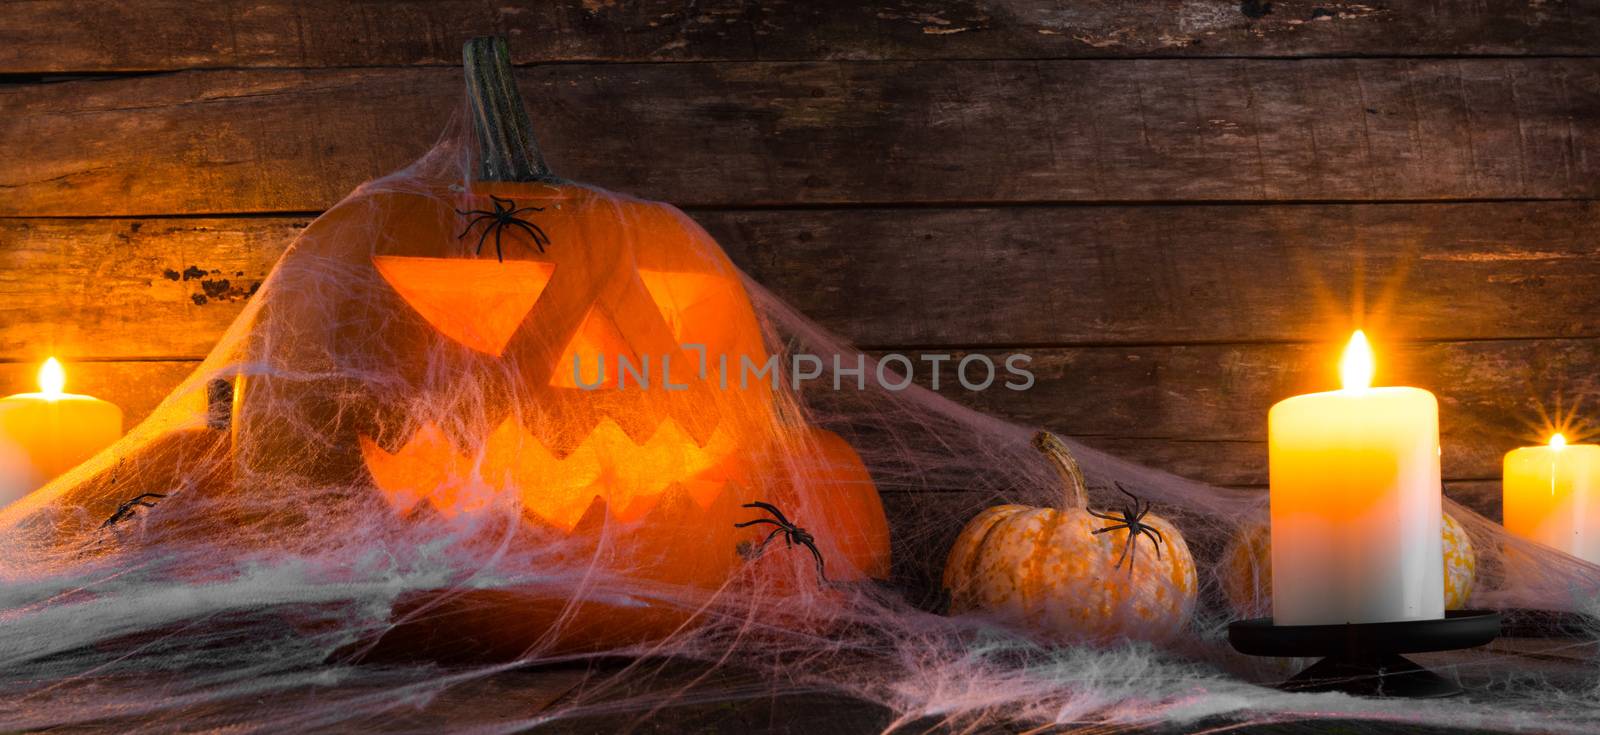 Jack O Lantern Halloween pumpkin, spiders on web and burning candles